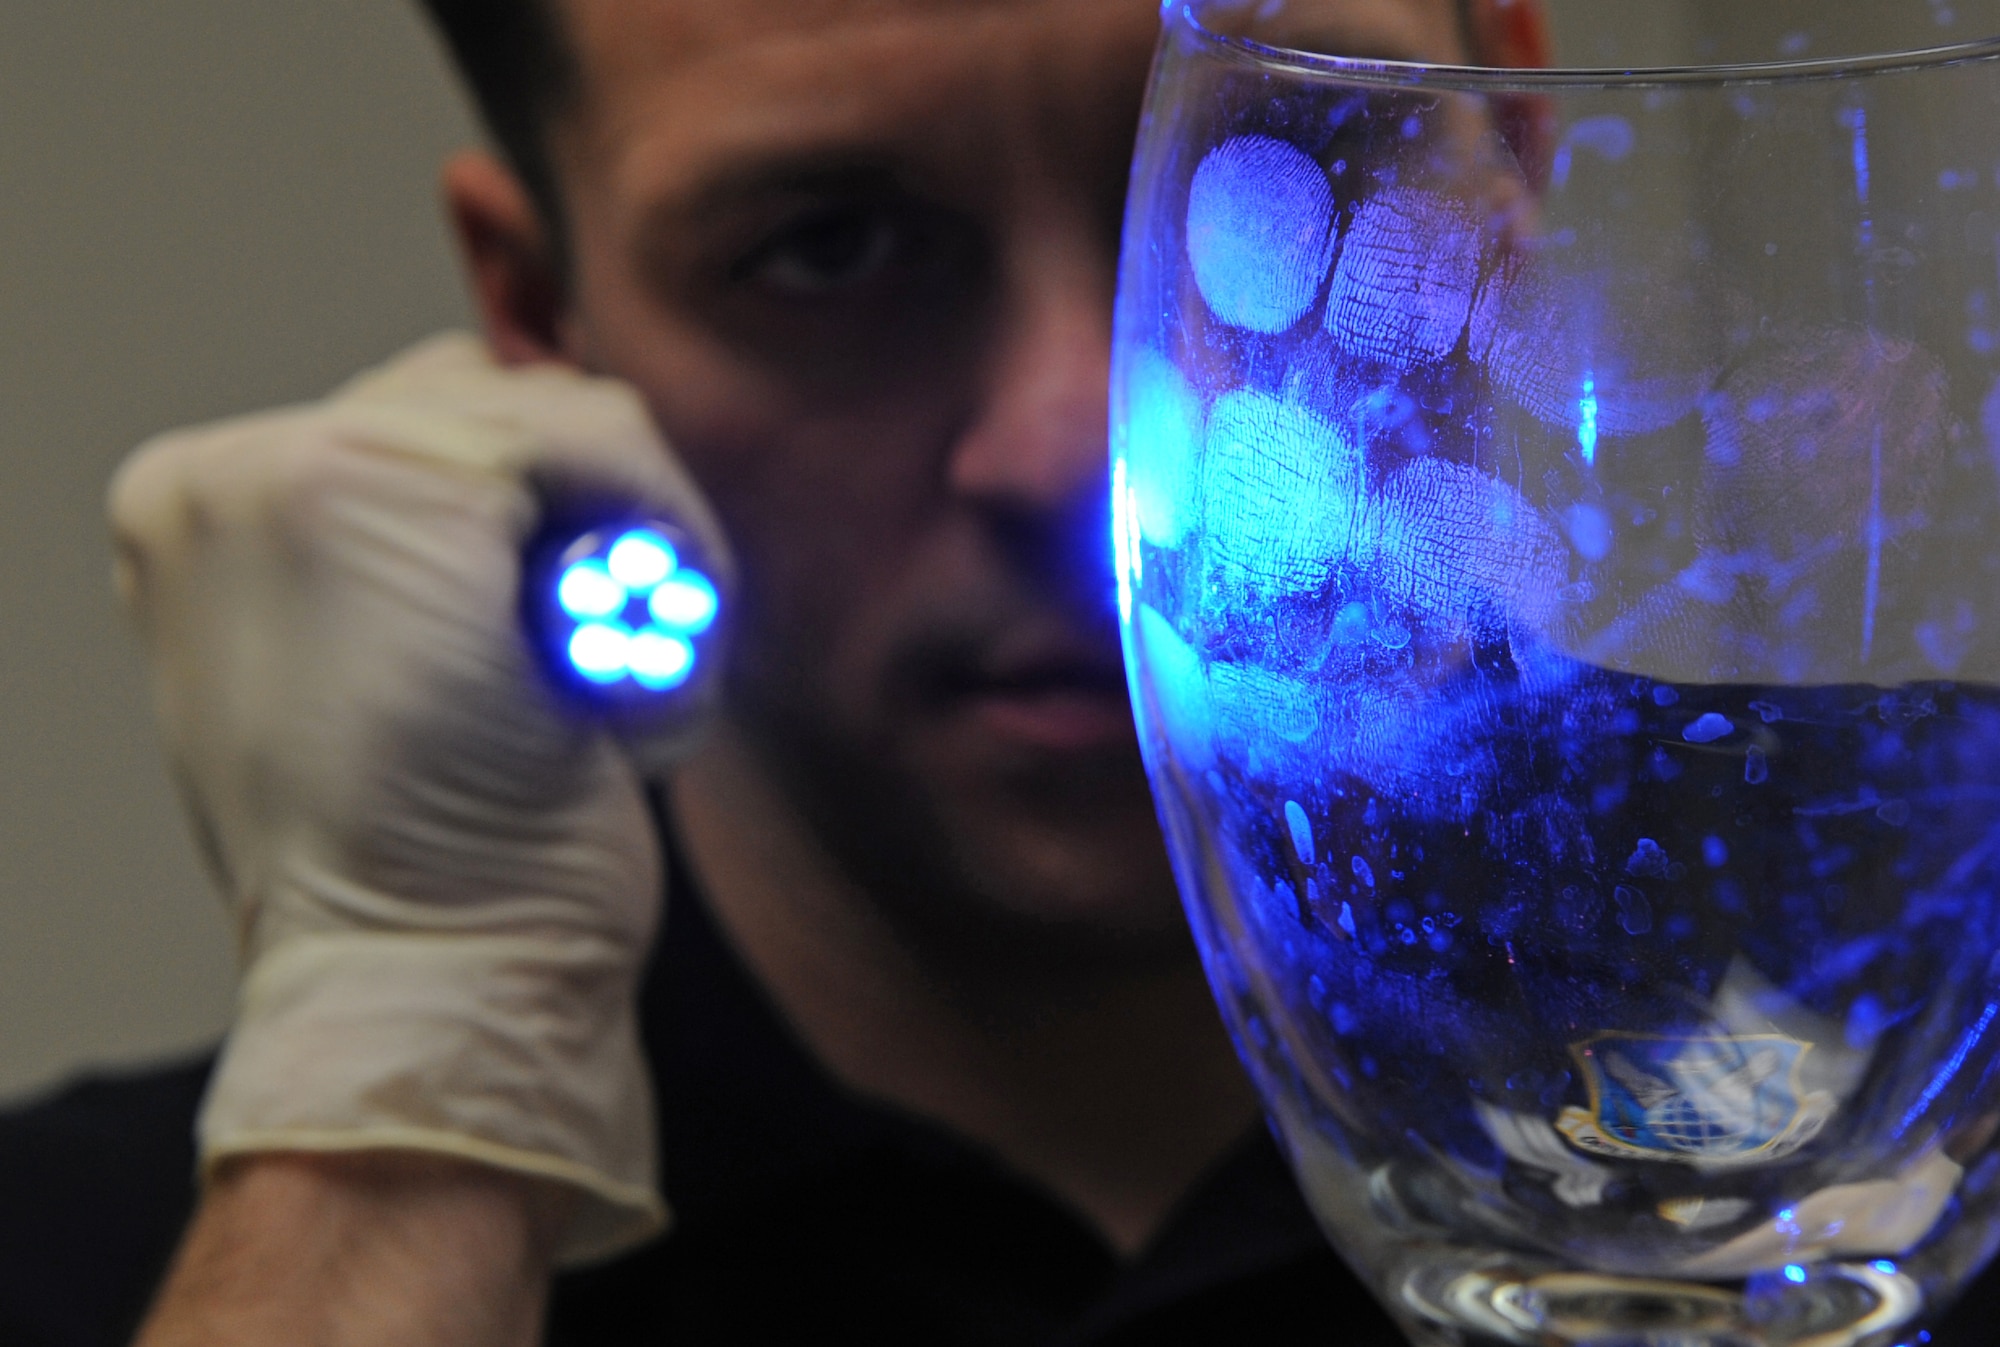 Special Agent Adam Deem shines light on a glass to reveal fingerprints on Barksdale Air Force Base, La. Deem dusted the glass with an orange powder that helps agents detect finger prints with ultraviolet light. Deem serves with Air Force Office of Special Investigation Detachment 219. (U.S. Air Force photo/Airman 1st Class Micaiah Anthony)